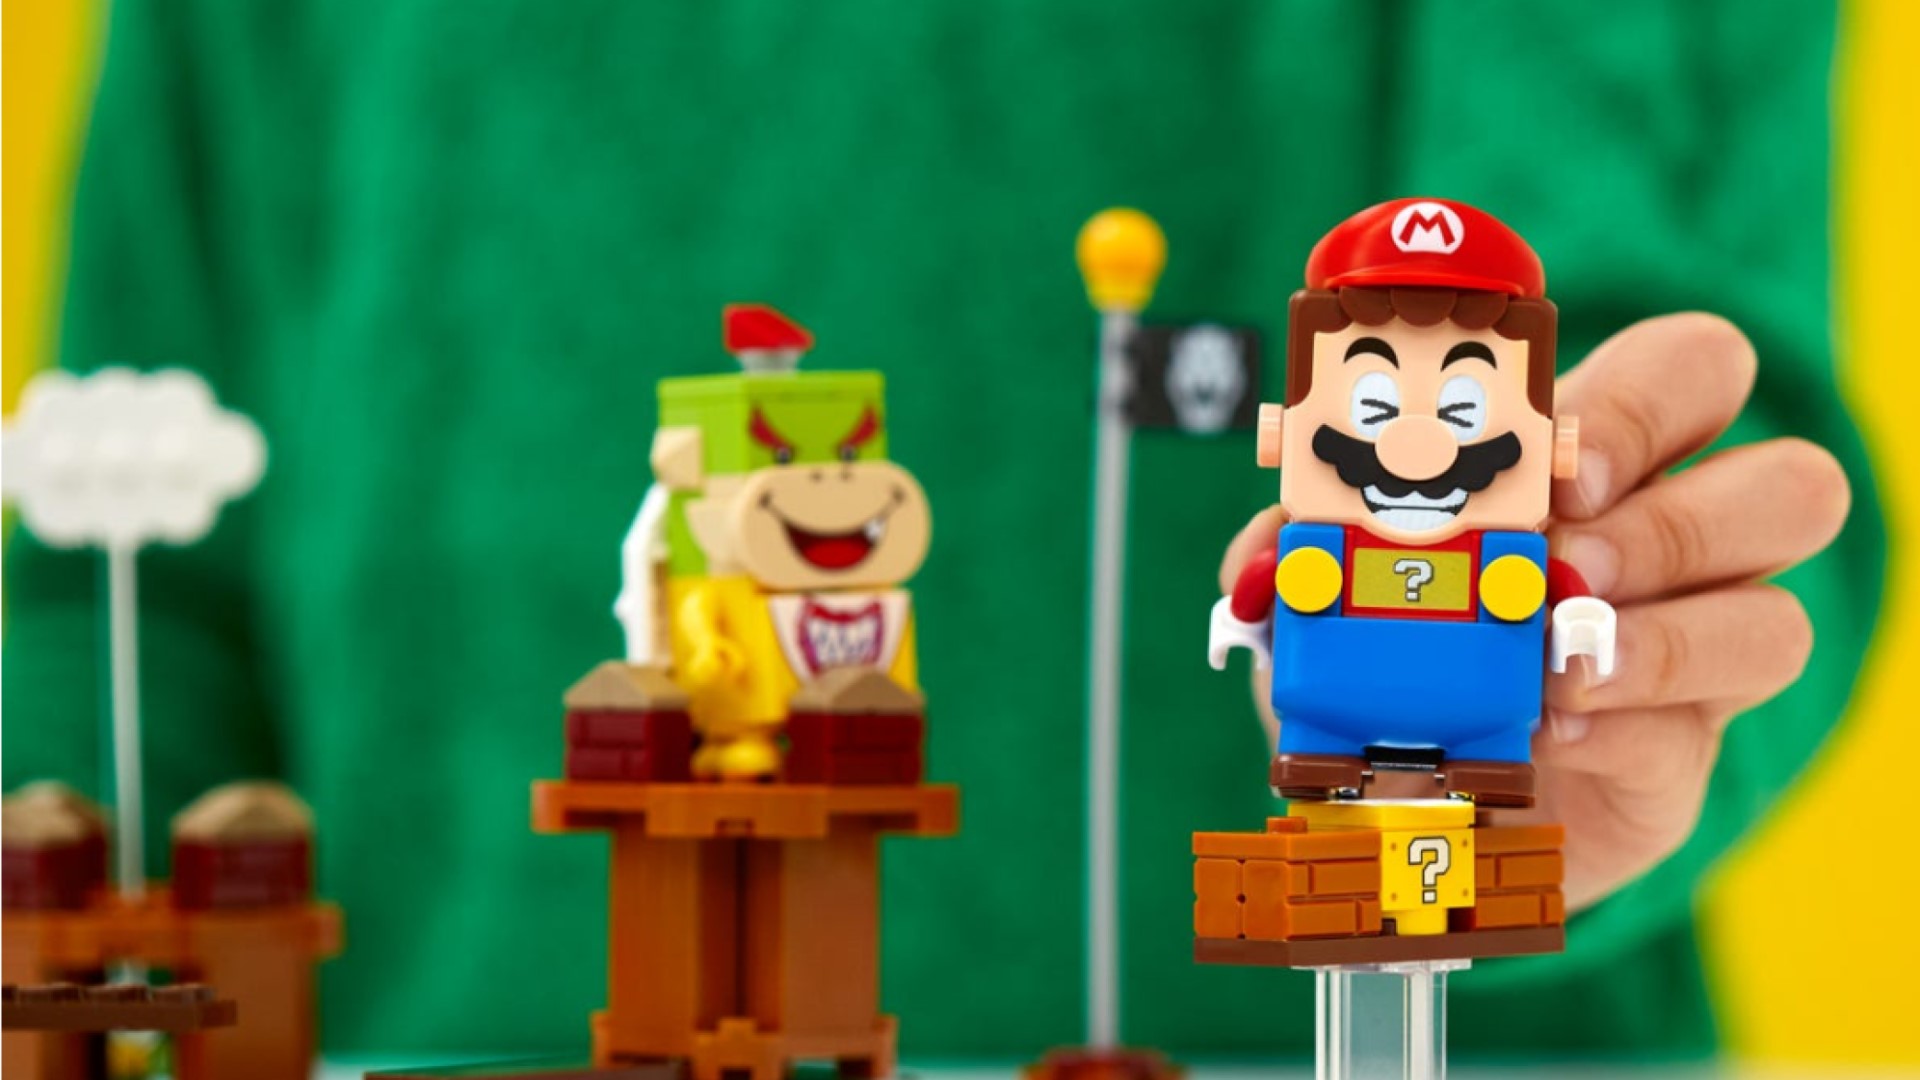 Lego Super Mario’s app is a beautiful building space designed by